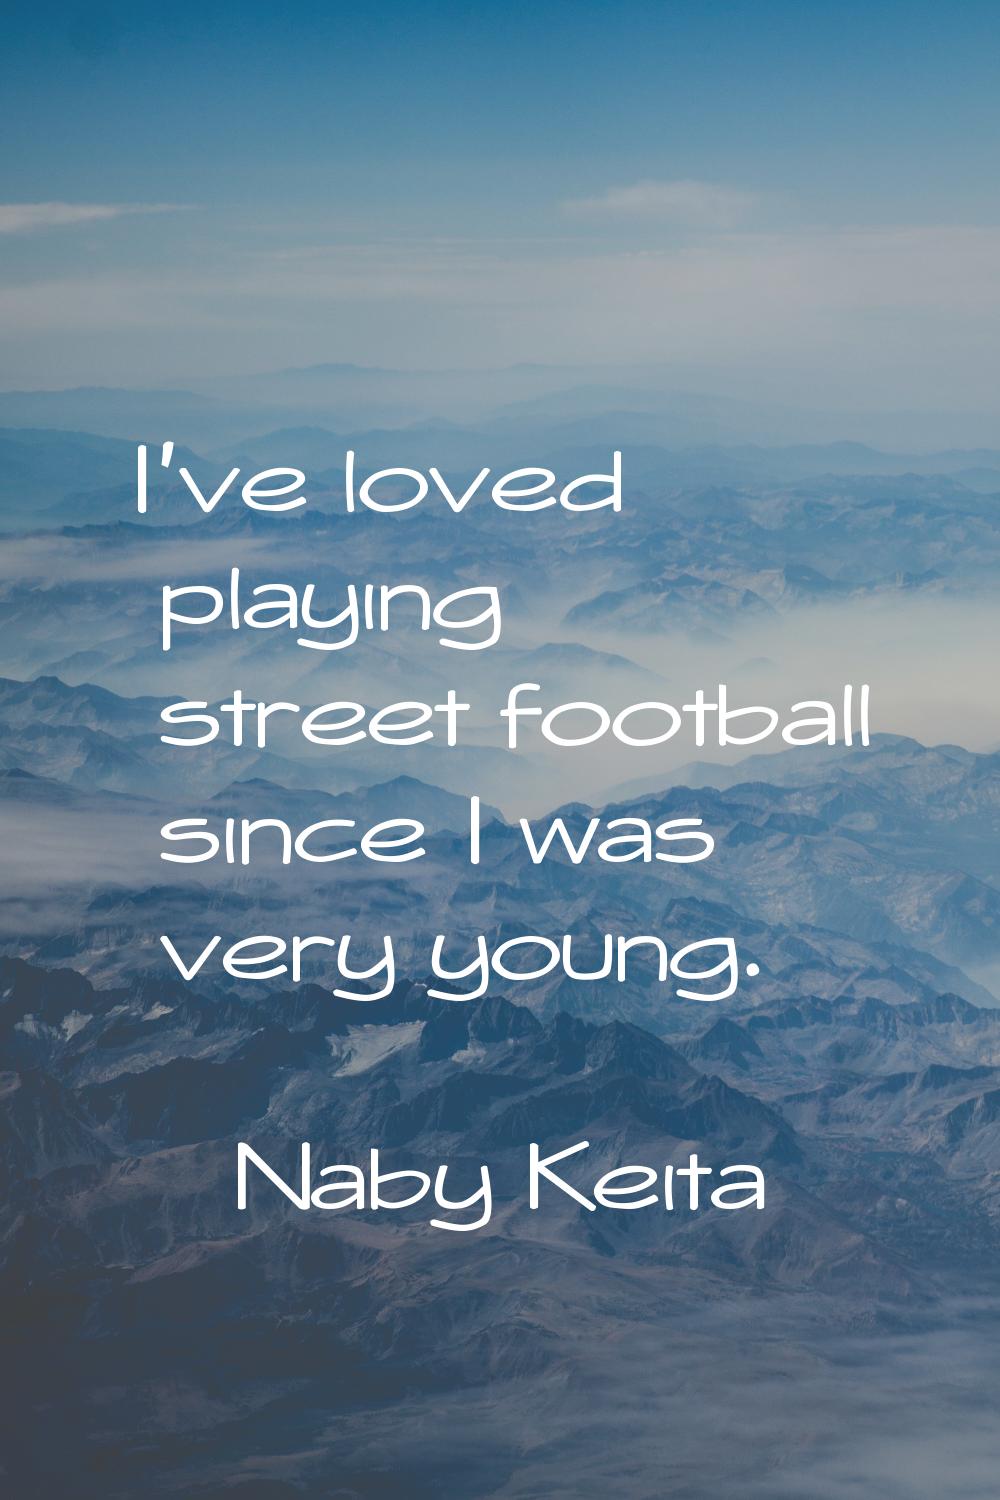 I've loved playing street football since I was very young.